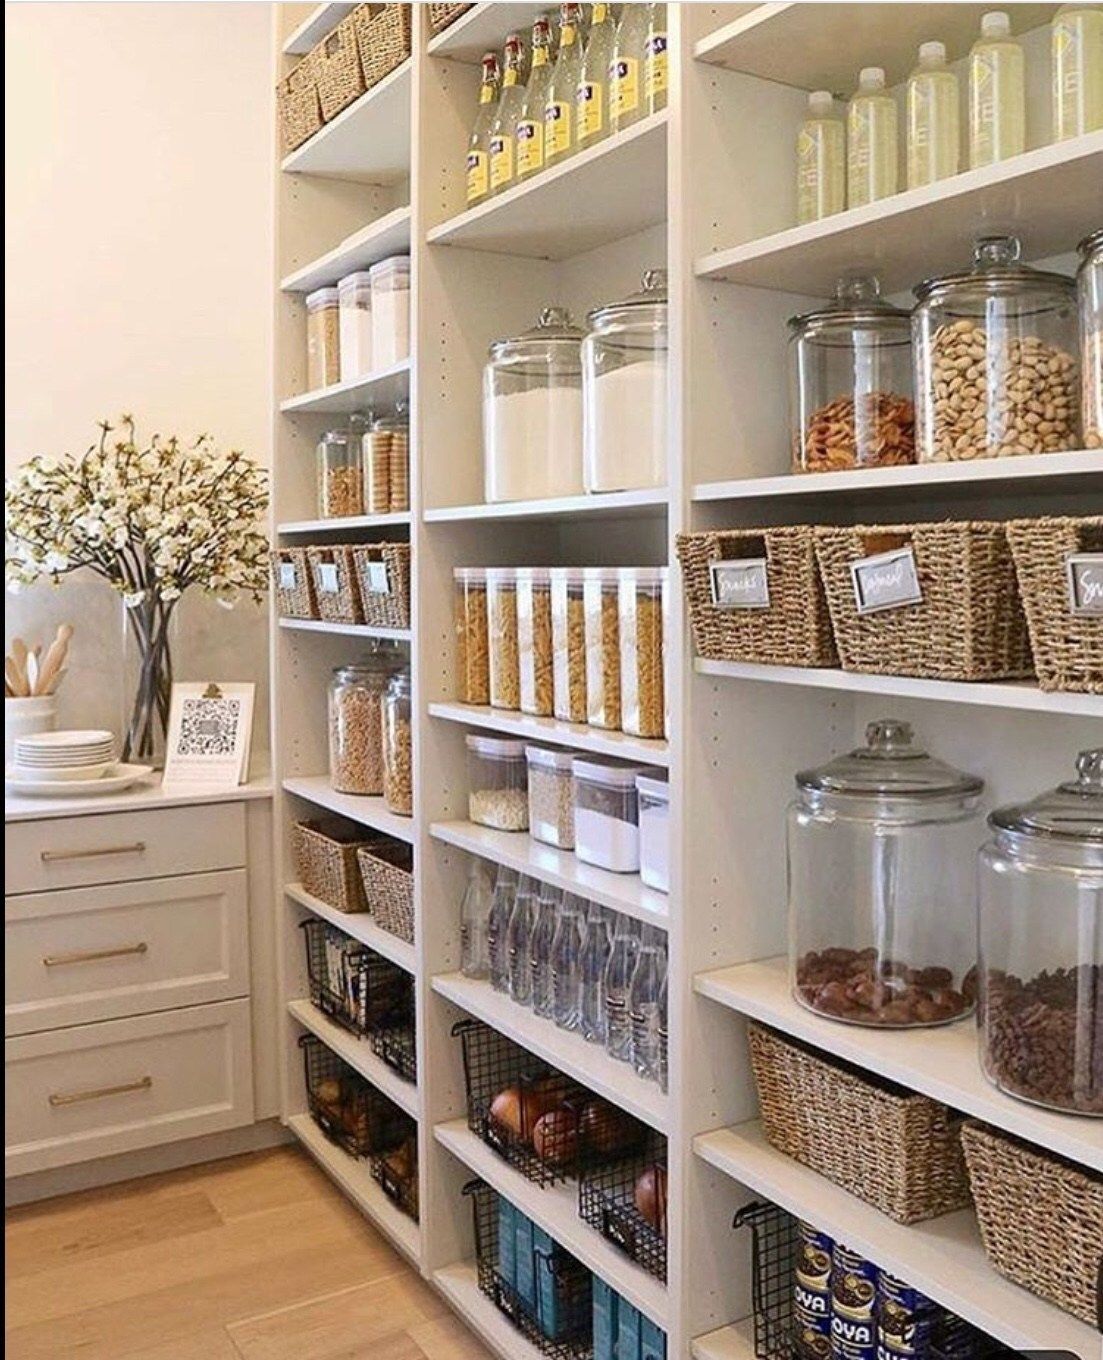 50+ Clever Pantry Organization Ideas - The Wonder Cottage - 50+ Clever Pantry Organization Ideas - The Wonder Cottage -   18 diy Apartment pantry ideas